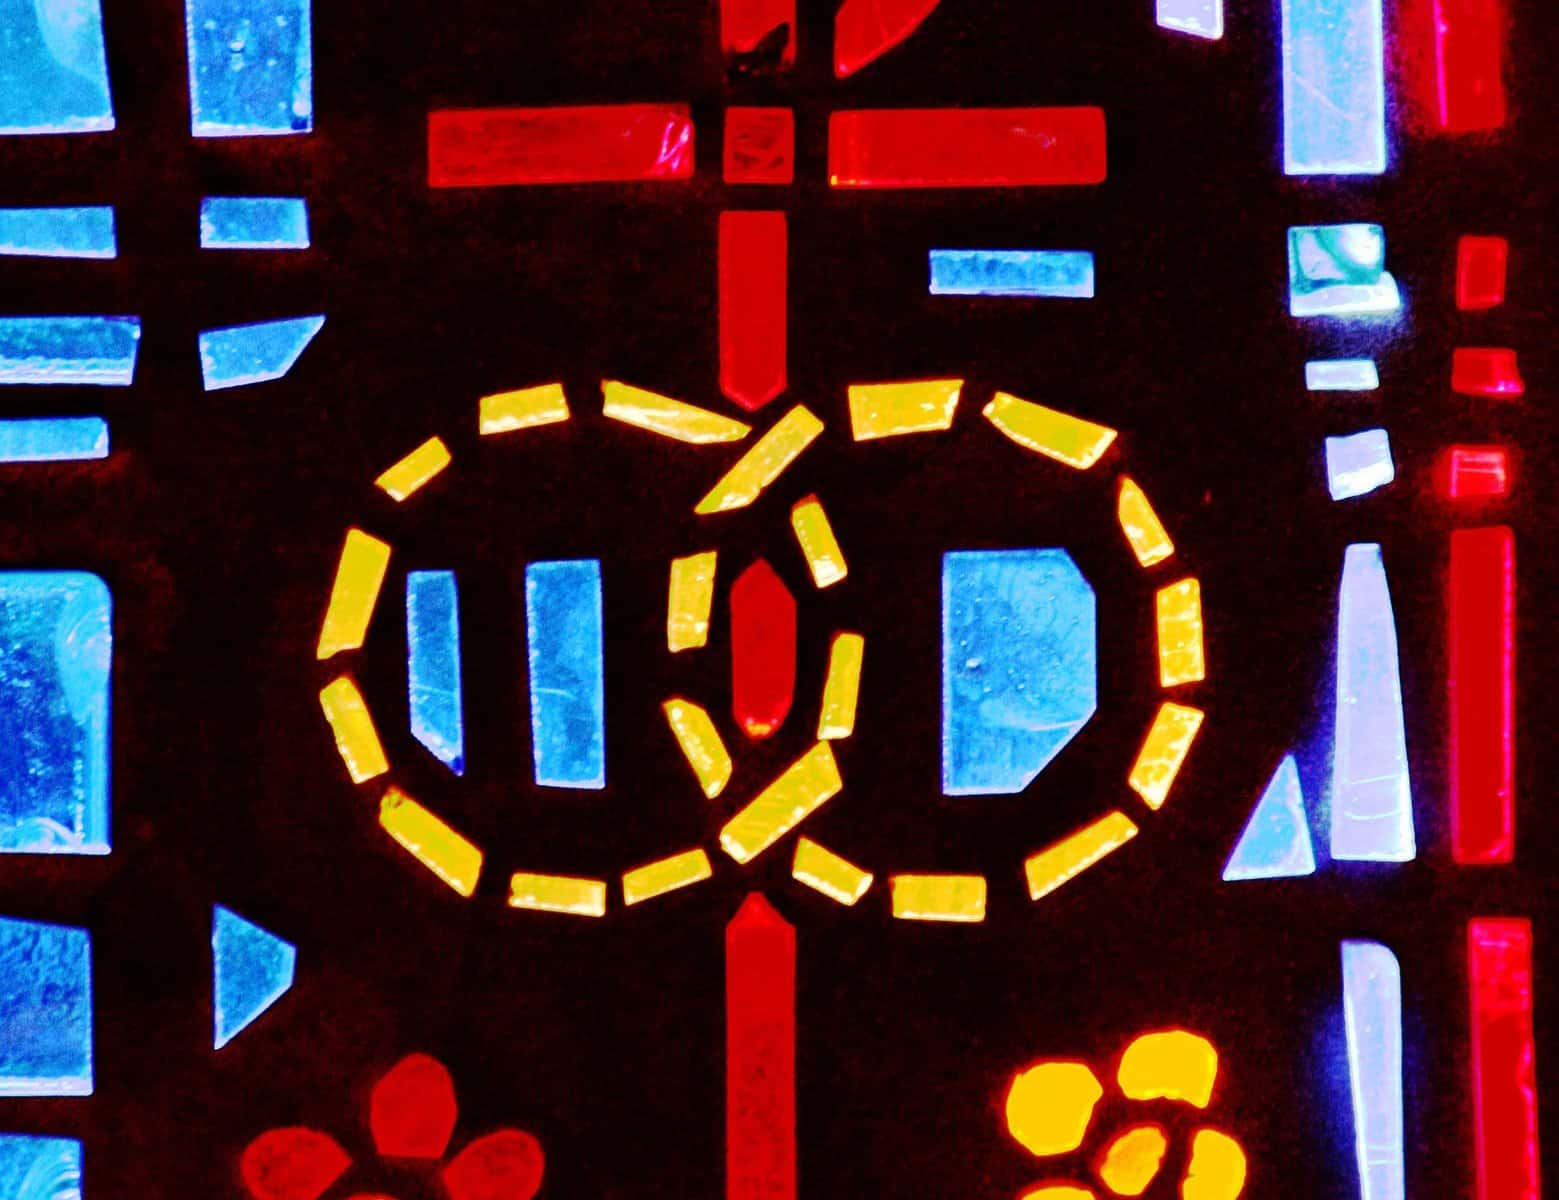 A pair of wedding bands symbolizing the sacrament of marriage is depicted in a stained-glass window at St. Isabel Church in Sanibel, Fla. (OSV News photo/CNS filer, Gregory A. Shemitz)